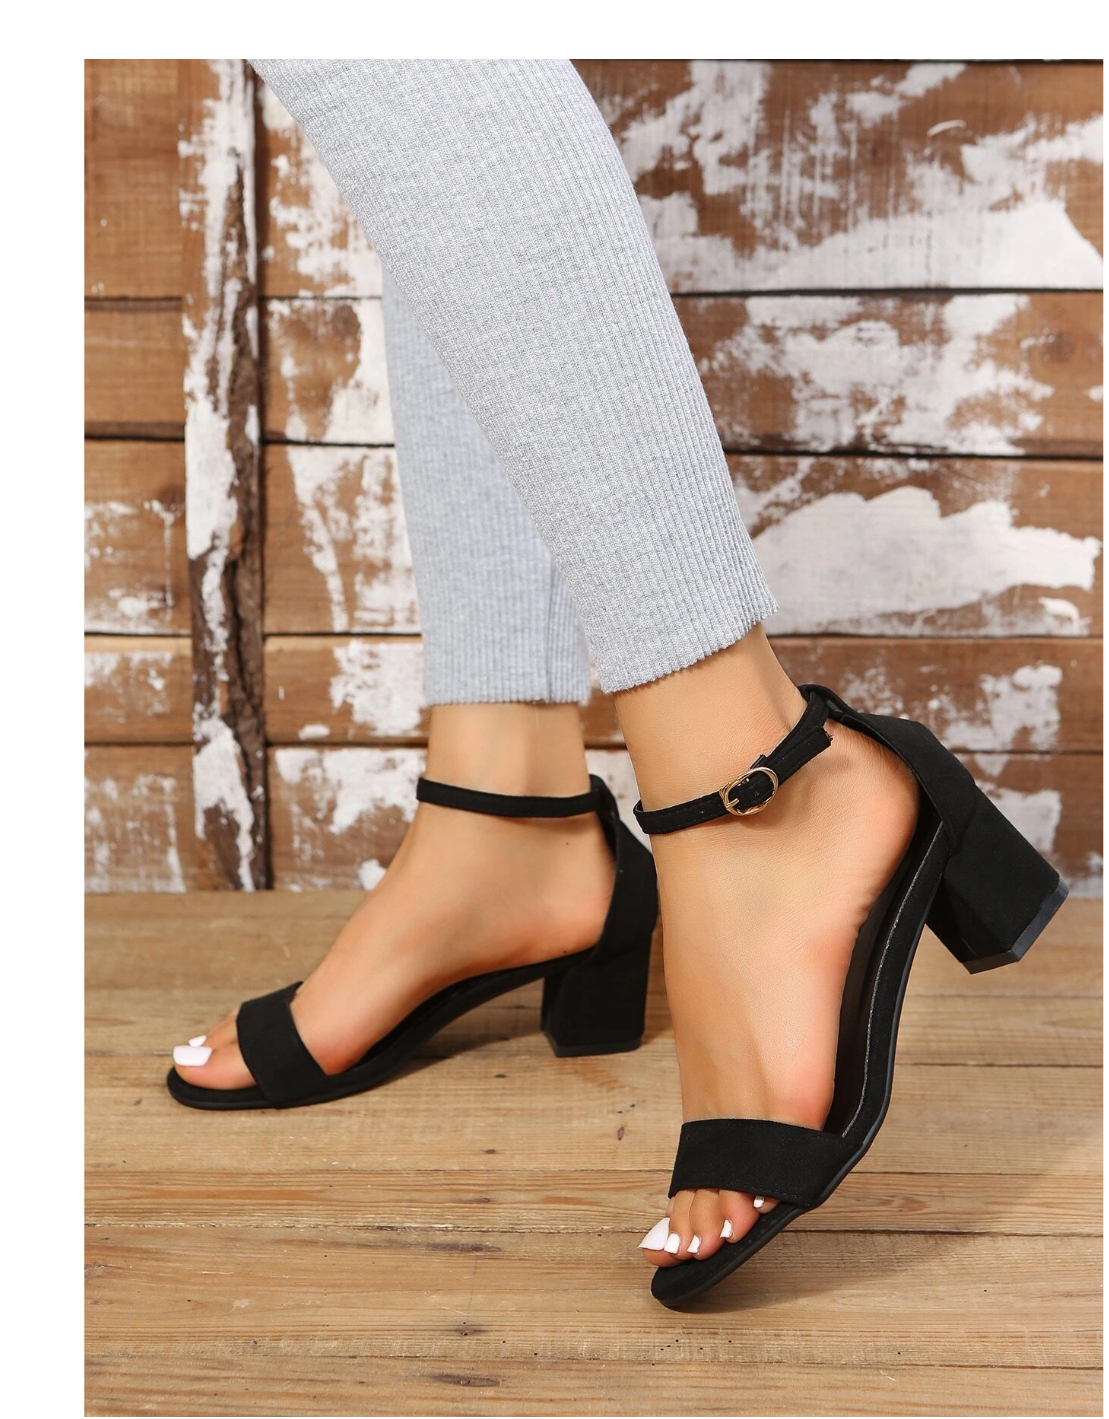 Elegance in Every Step: Women's Black Chunky Heeled Ankle Strap Sandals with Elegant Open Toe Design